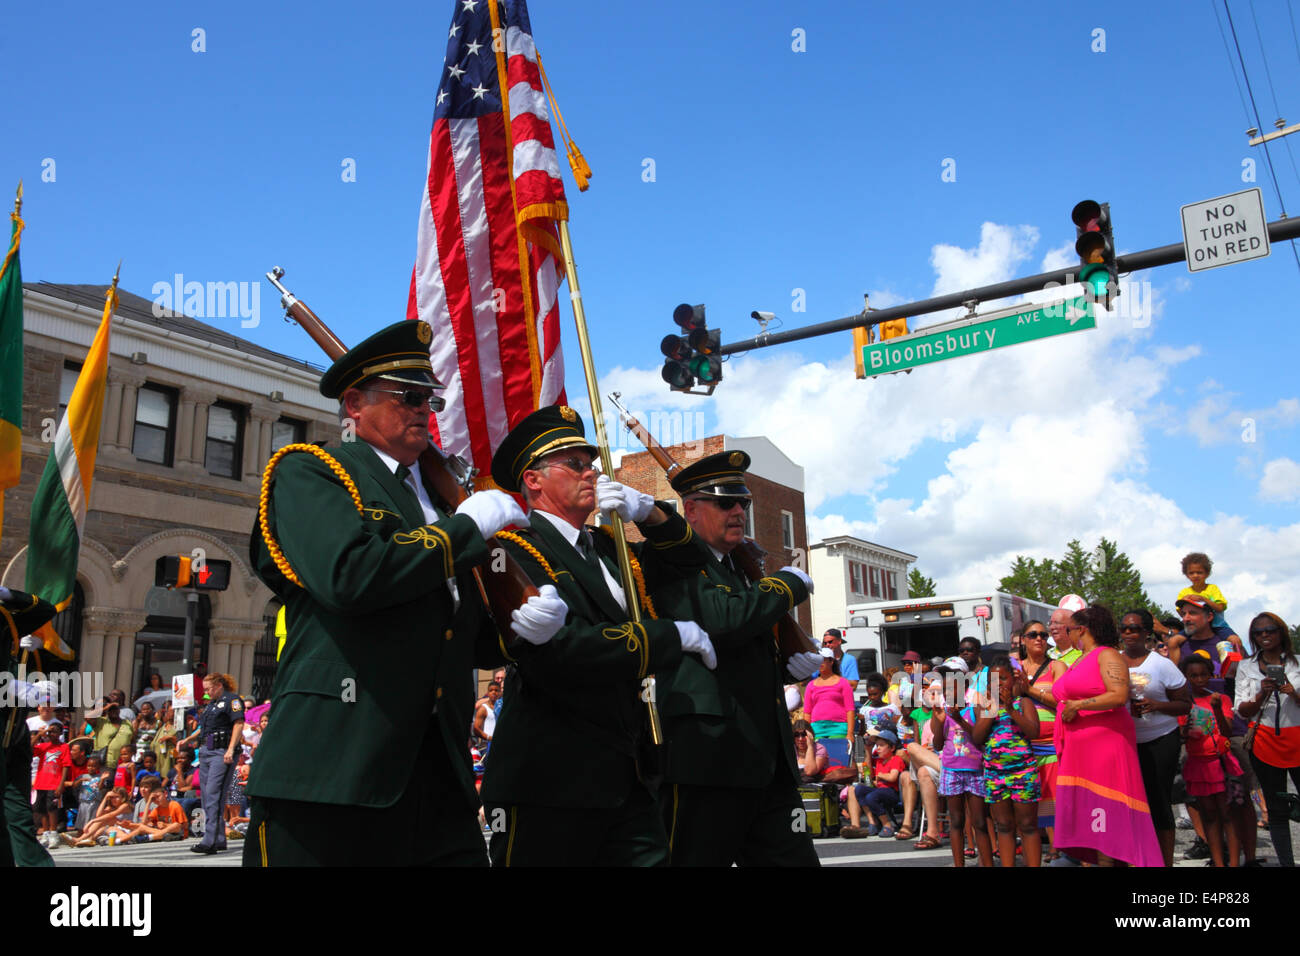 Members of City of Westminster marching band take part in 4th of July Independence Day parades, Catonsville, Maryland, USA Stock Photo